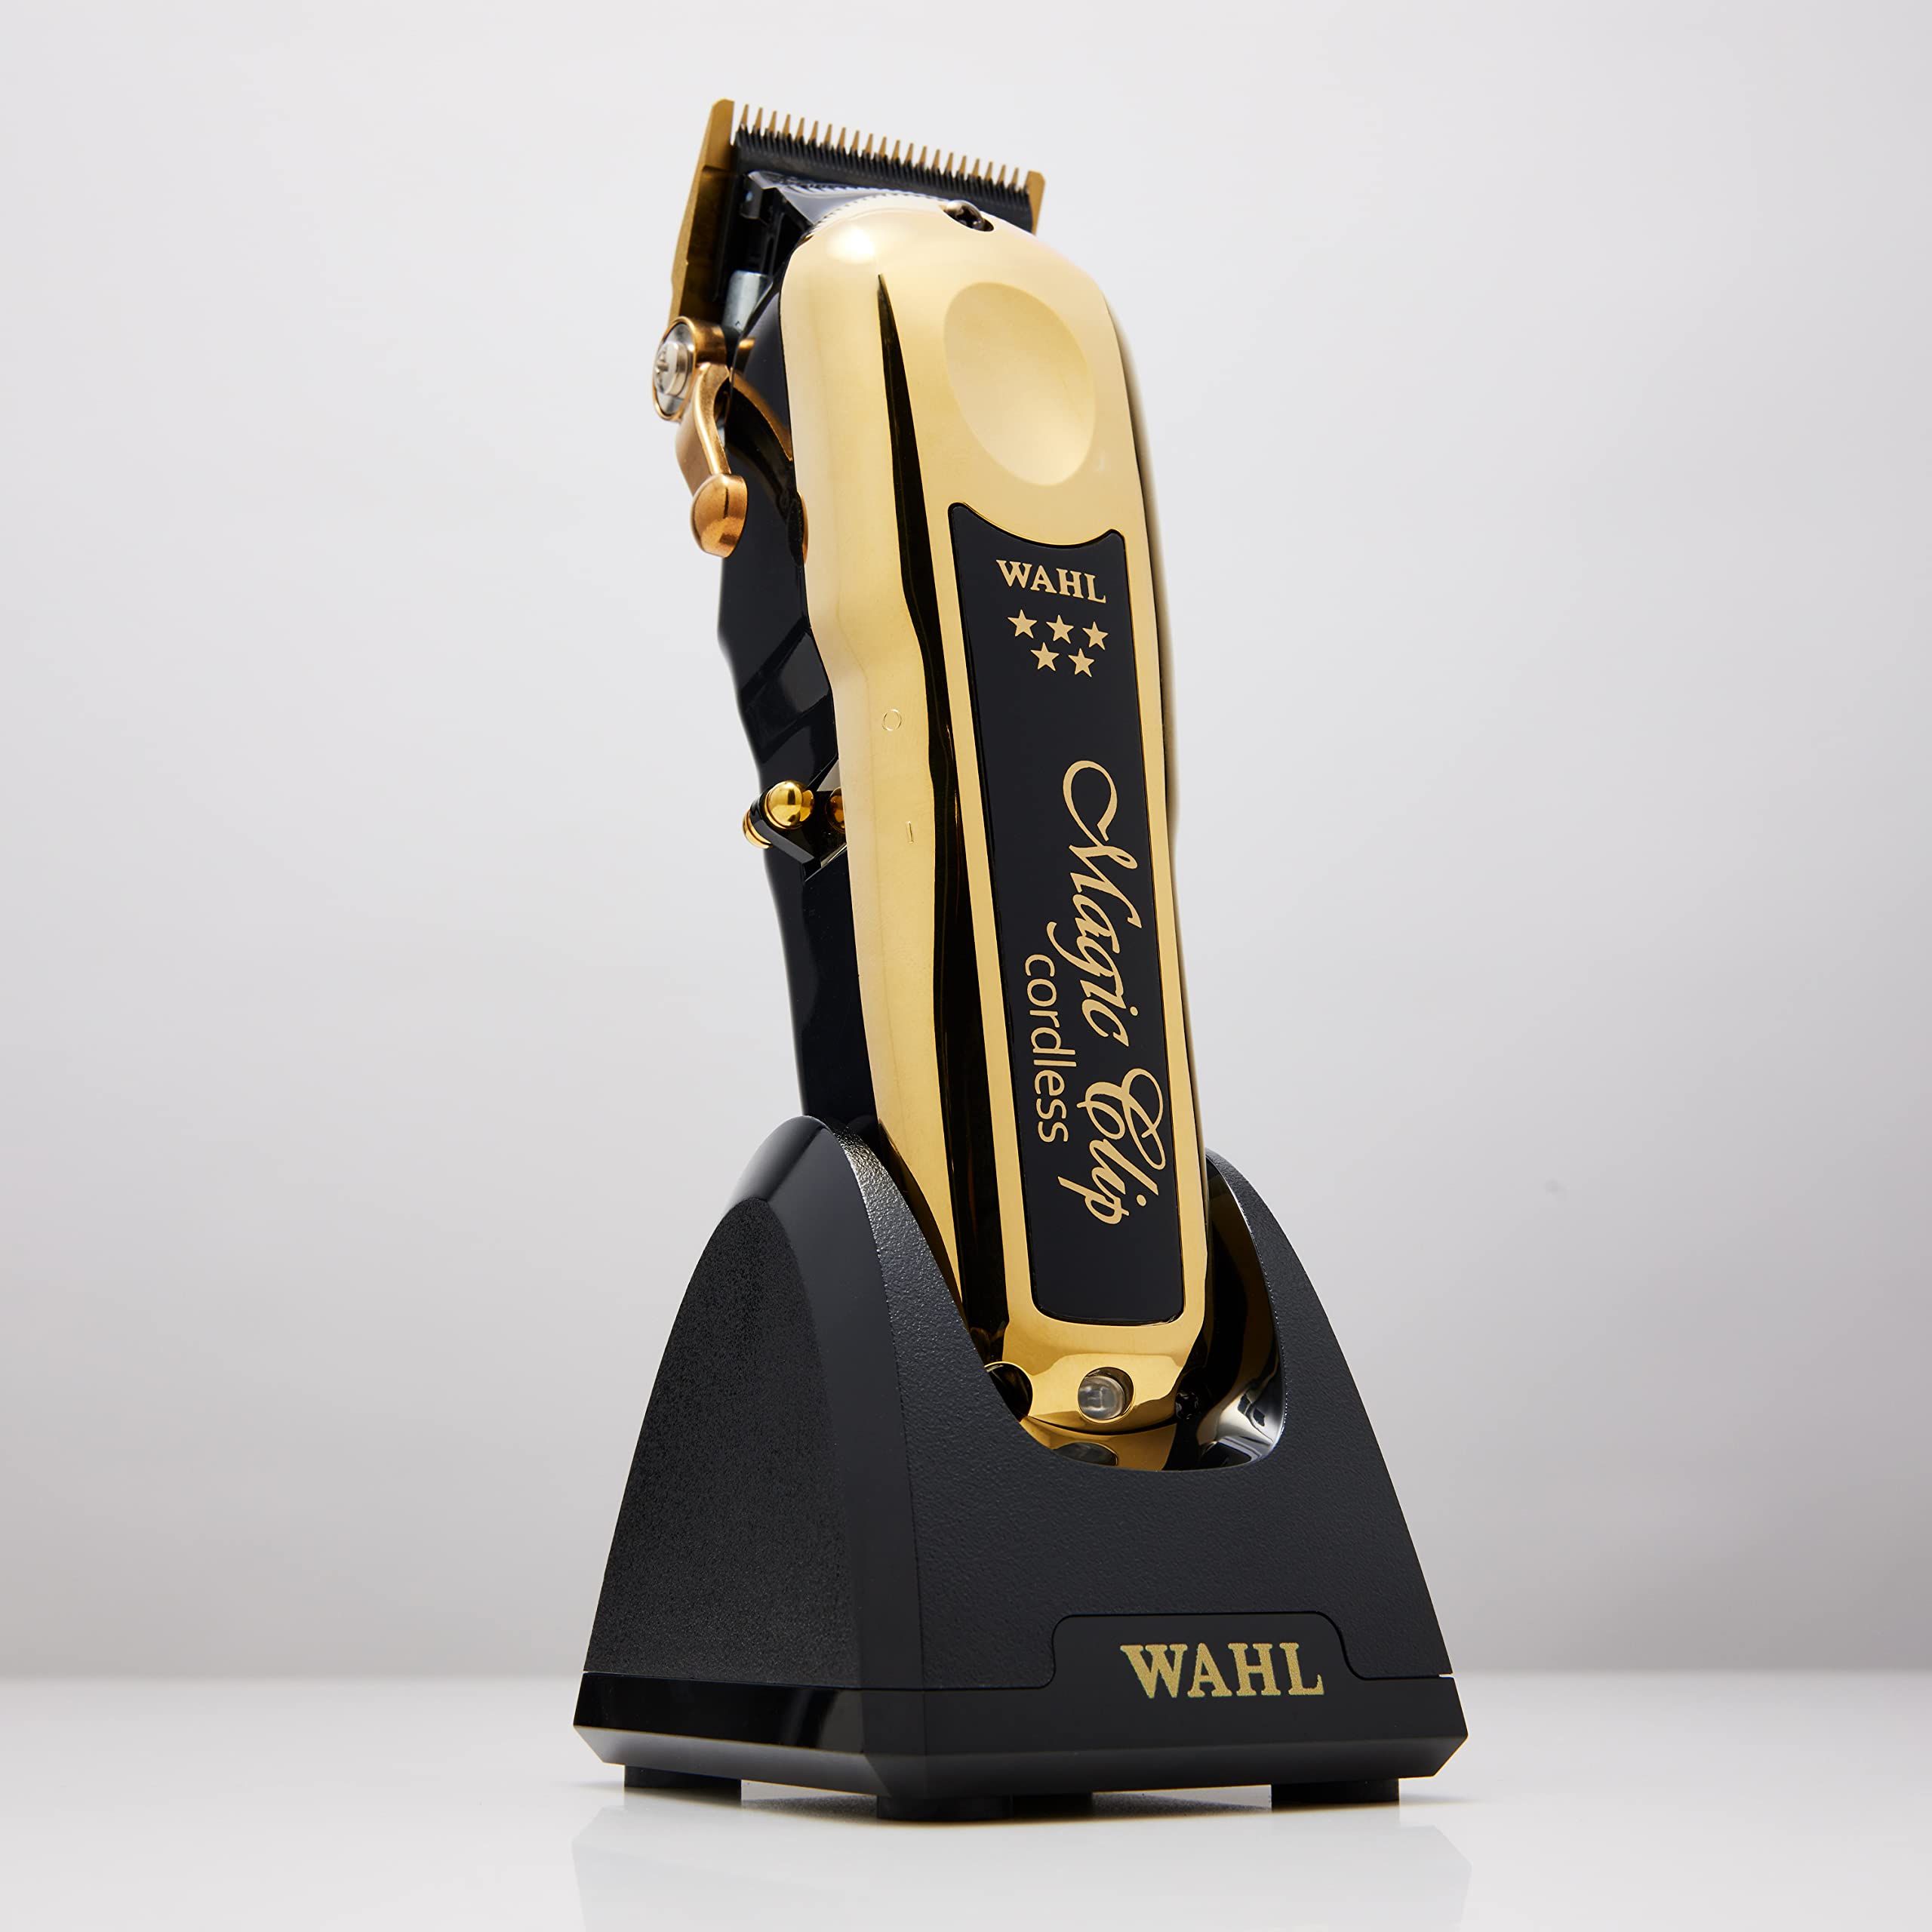 Wahl Professional 5 Star Gold Cordless Magic Clip Hair Clipper with 100+ Minute Run Time for Professional Barbers and Stylists - Model 8148-700